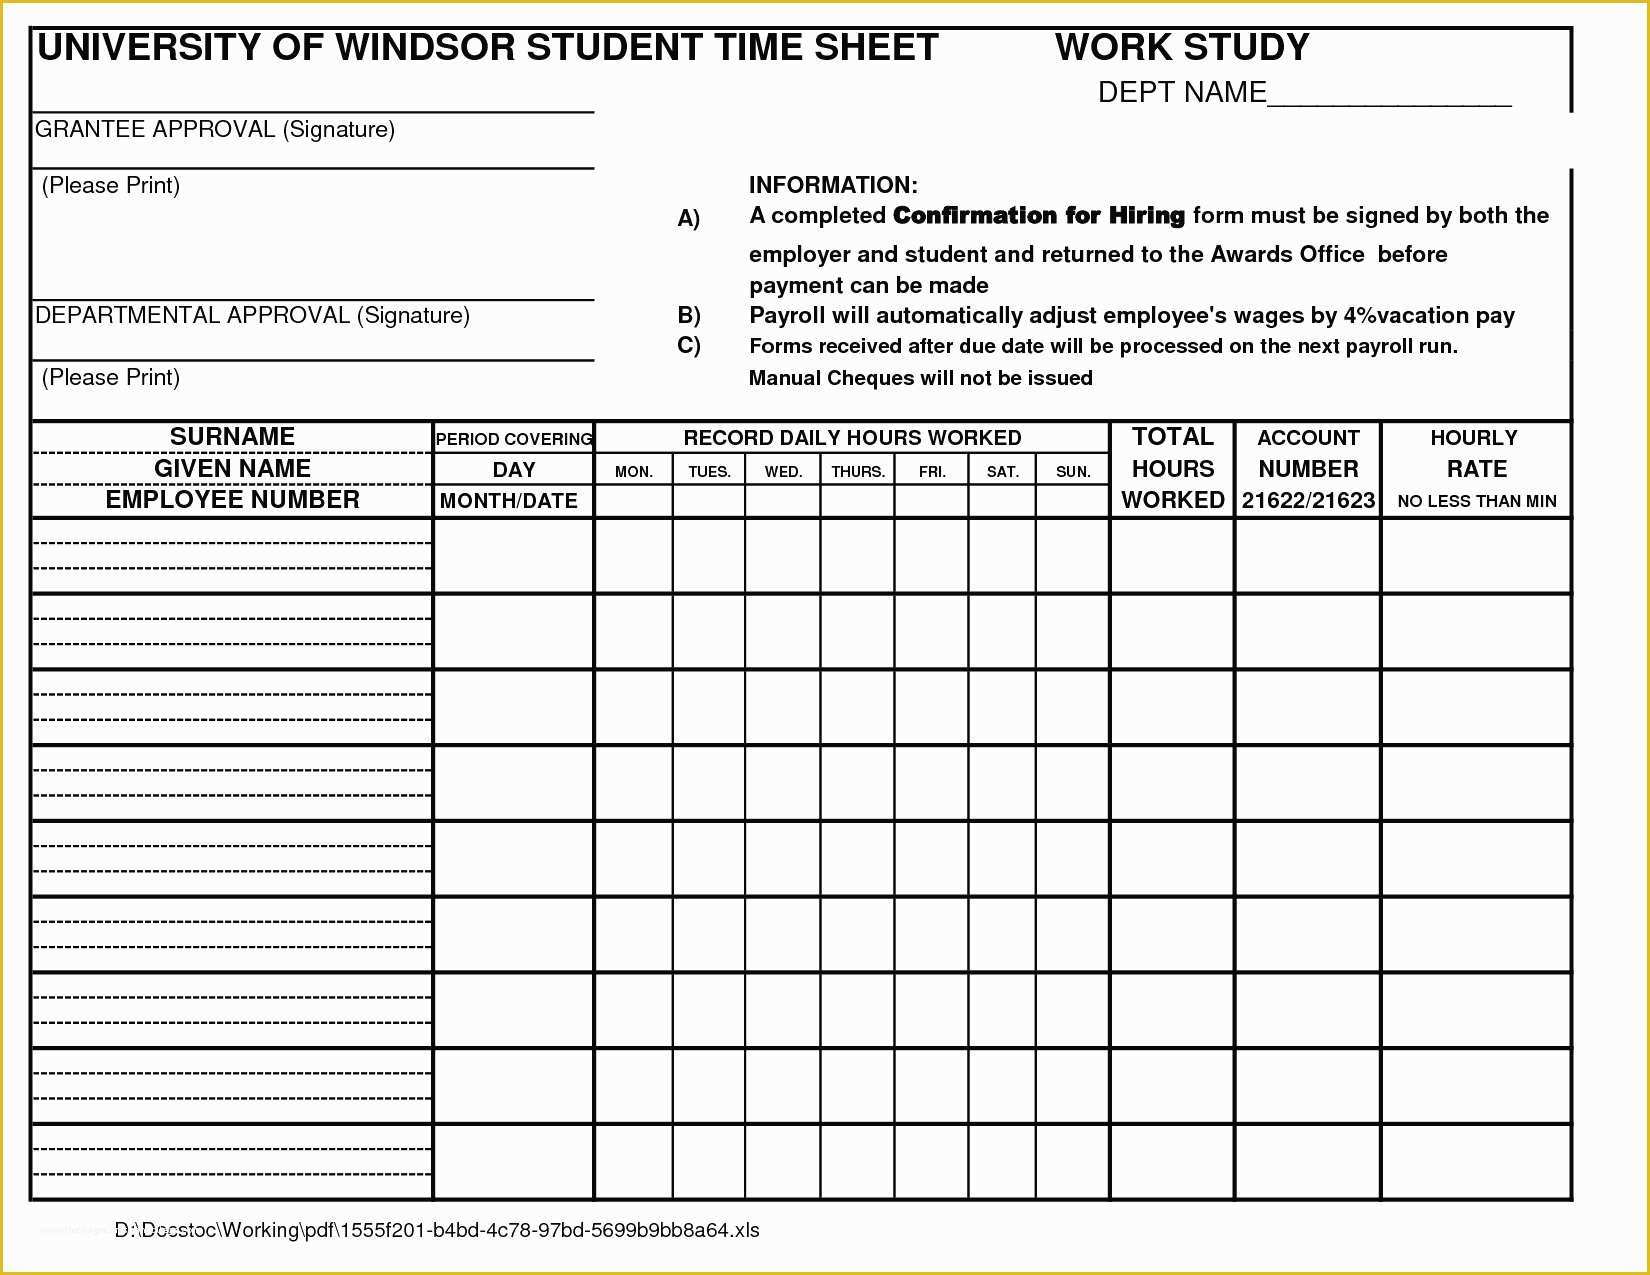 Free Time Study Template Excel Download Of Time Study Template Excel 9 Things Your Boss Needs to Know